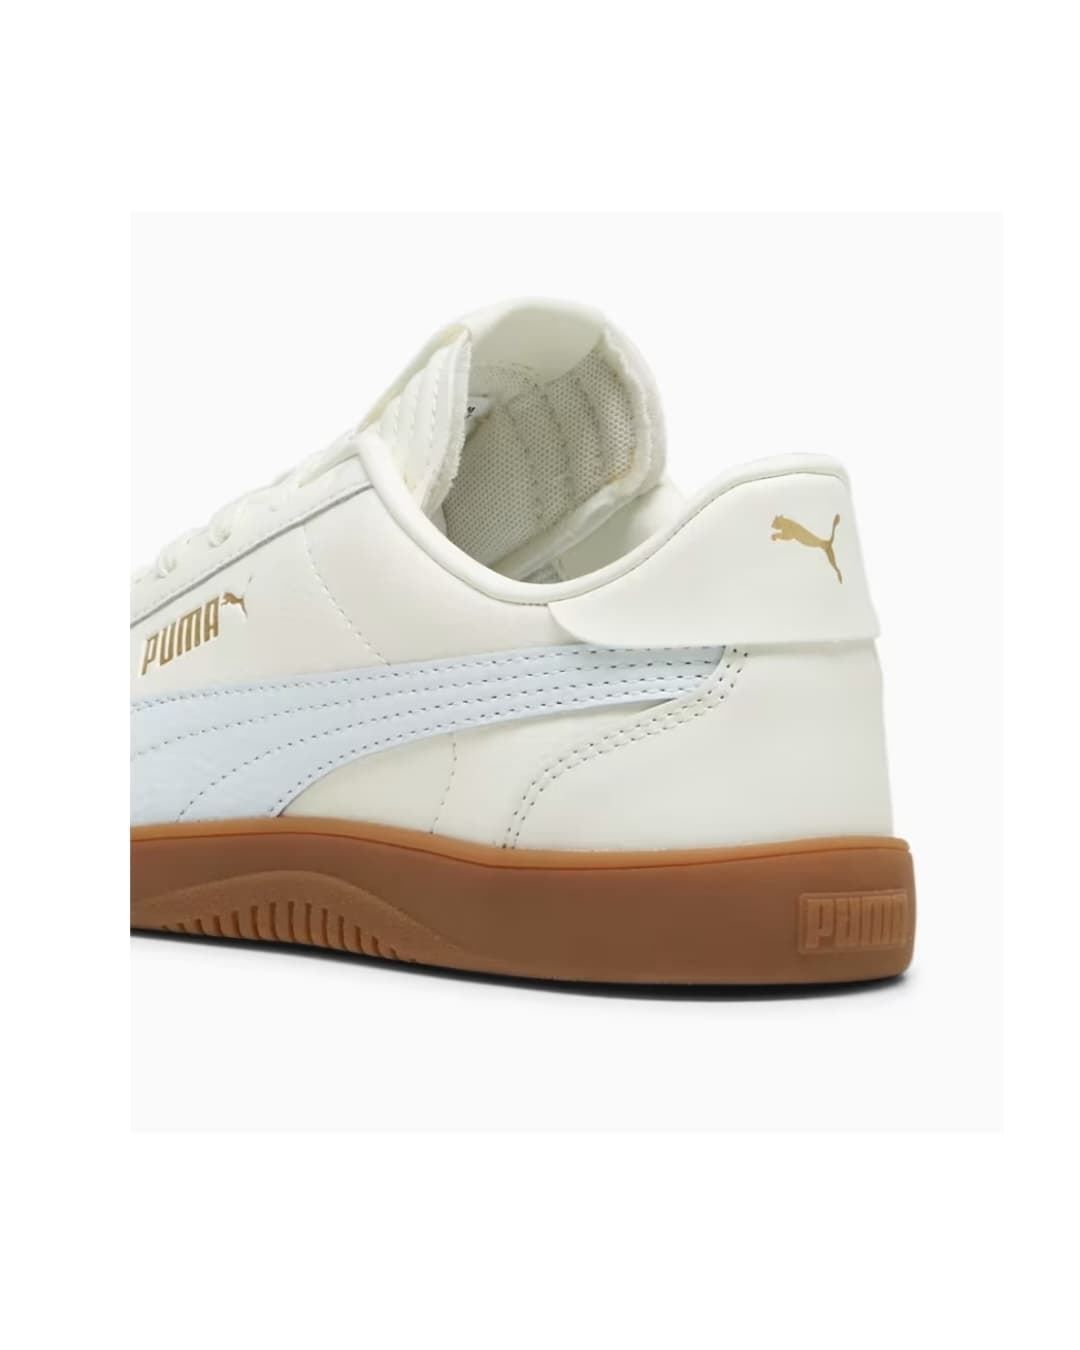 Puma Club 5v5 Sneakers for girls and women - Image 2